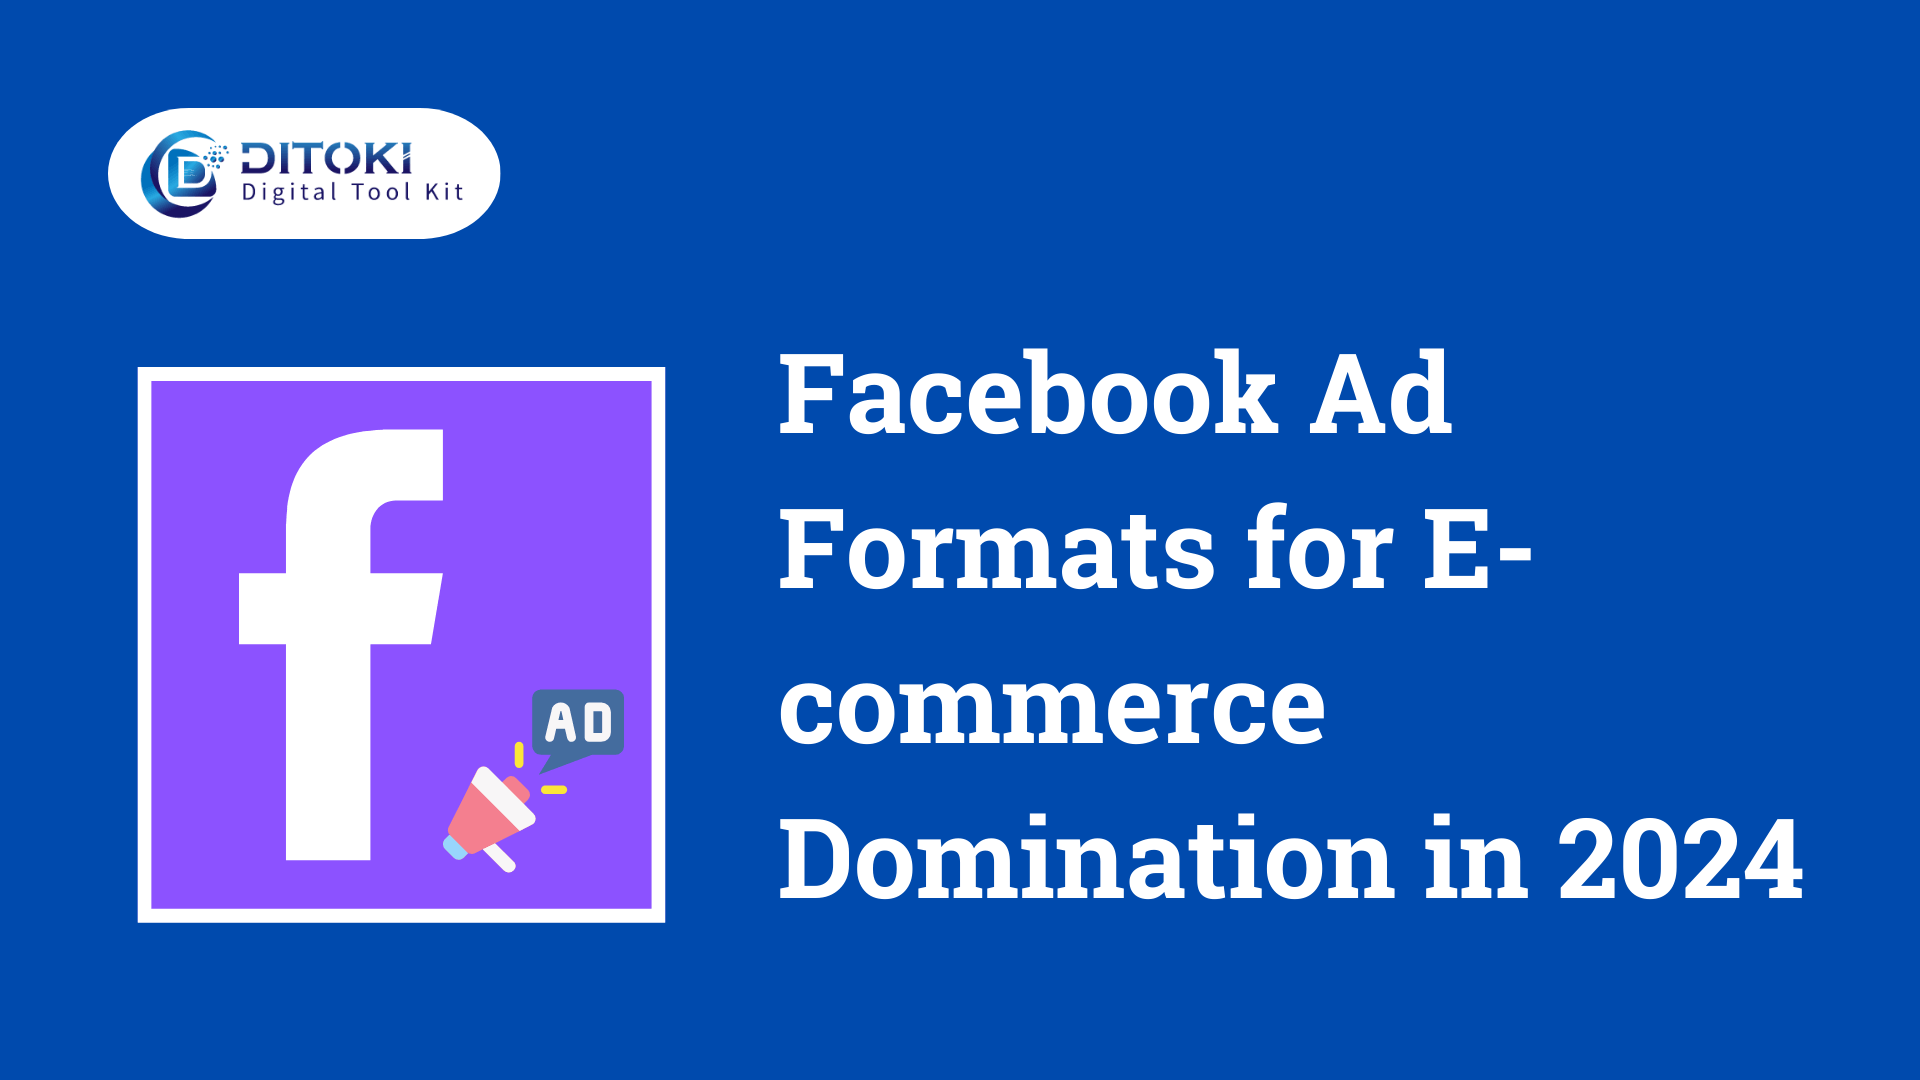 Facebook Ad Formats for E-commerce Domination in 2024